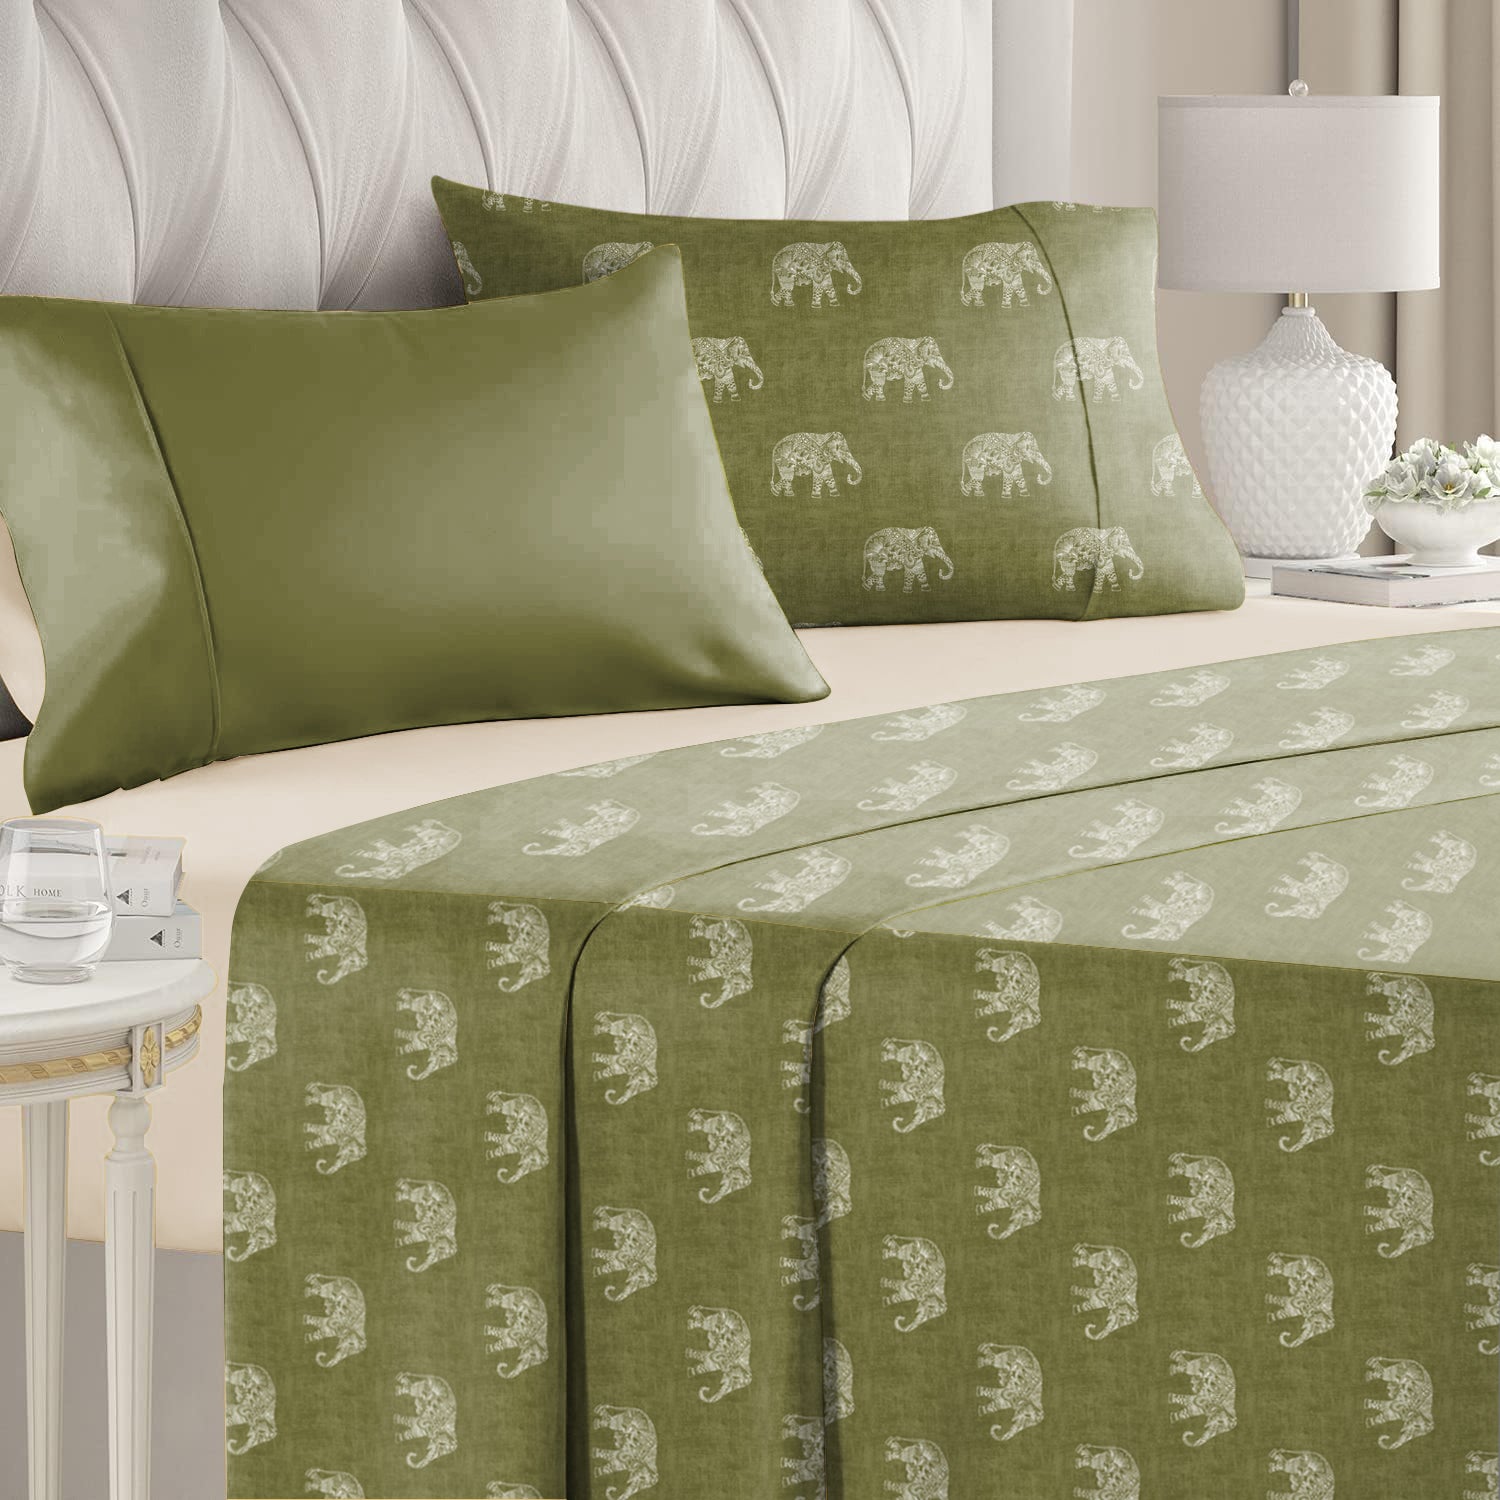 Jodhpur Elephant Bedsheet for Double Bed with 2 PillowCovers King Size (104" X 90") Olive